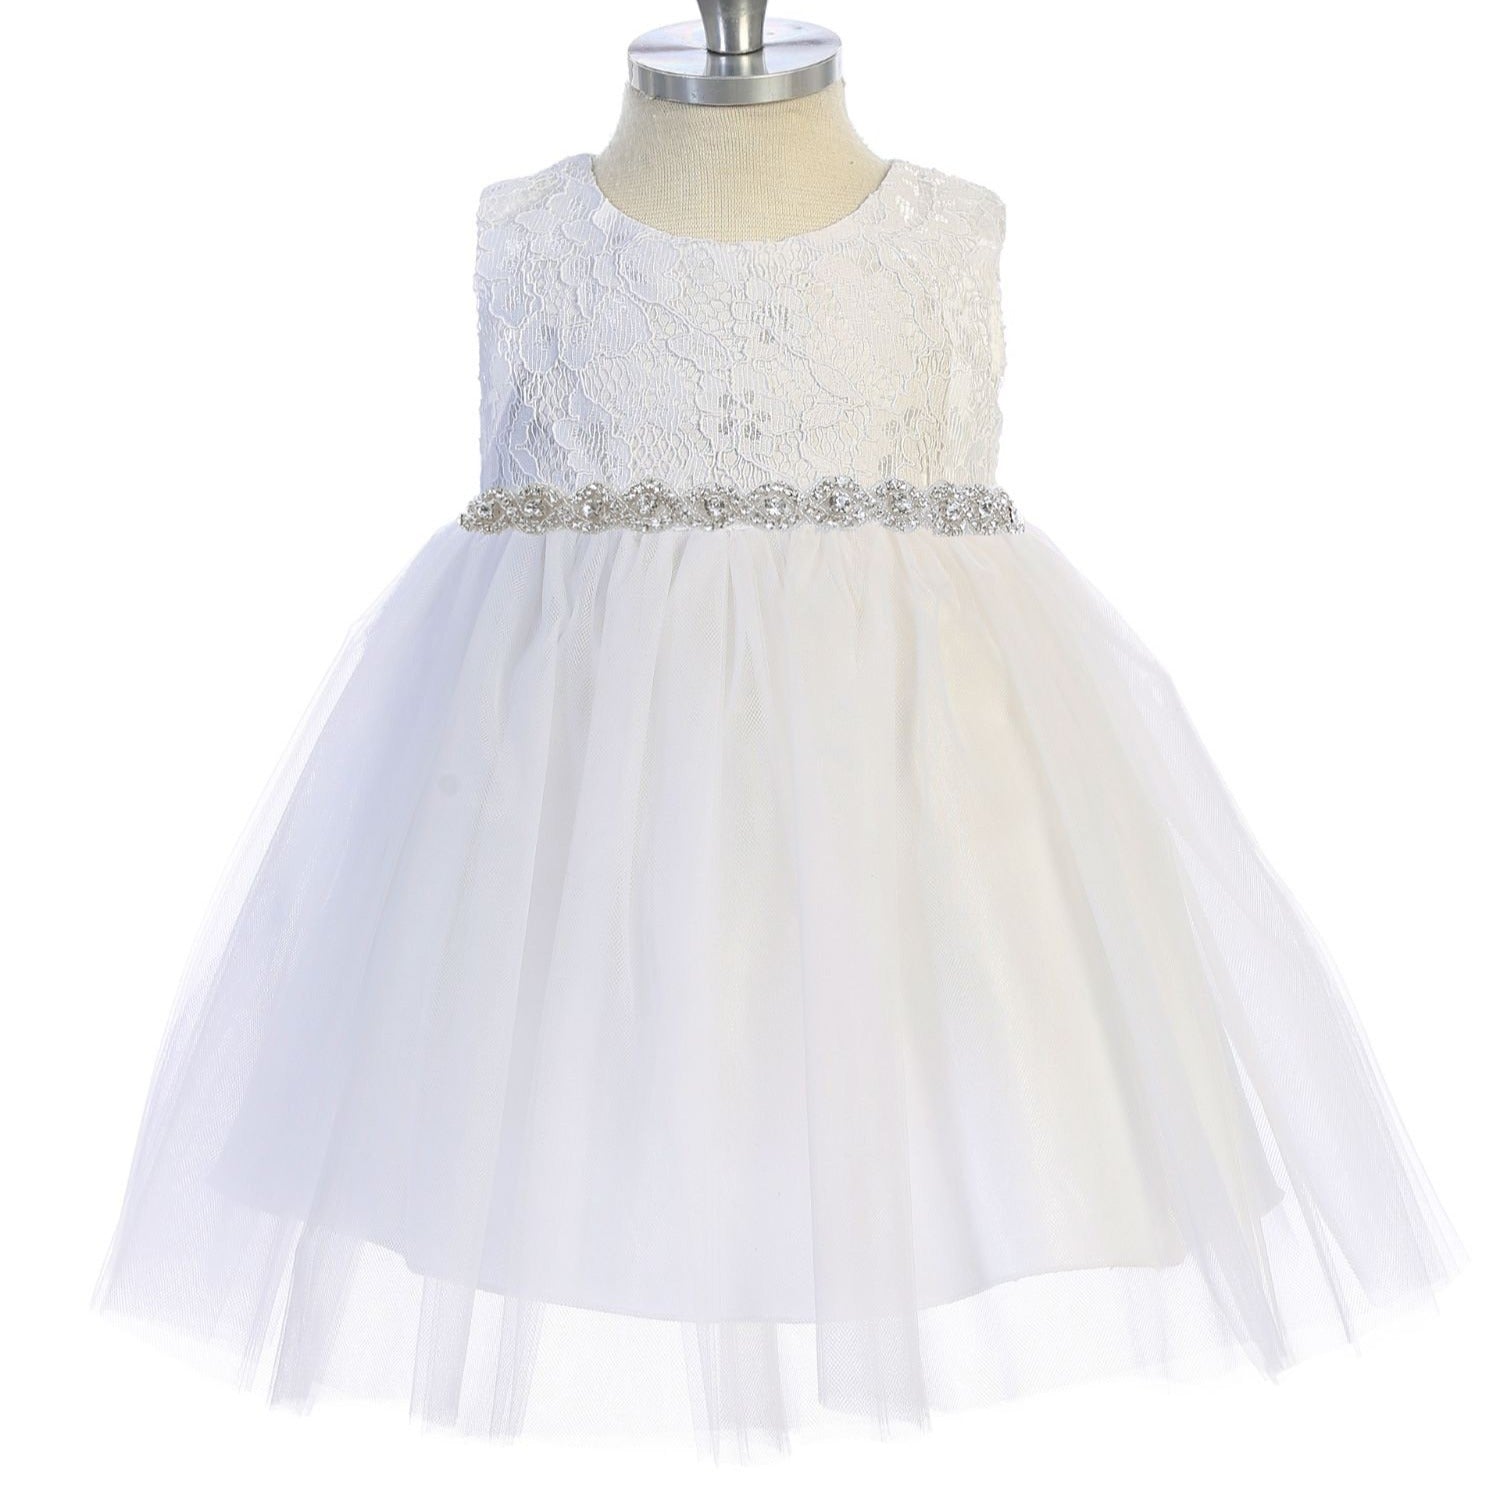 Baby Lace & Love Girls Formal Dress